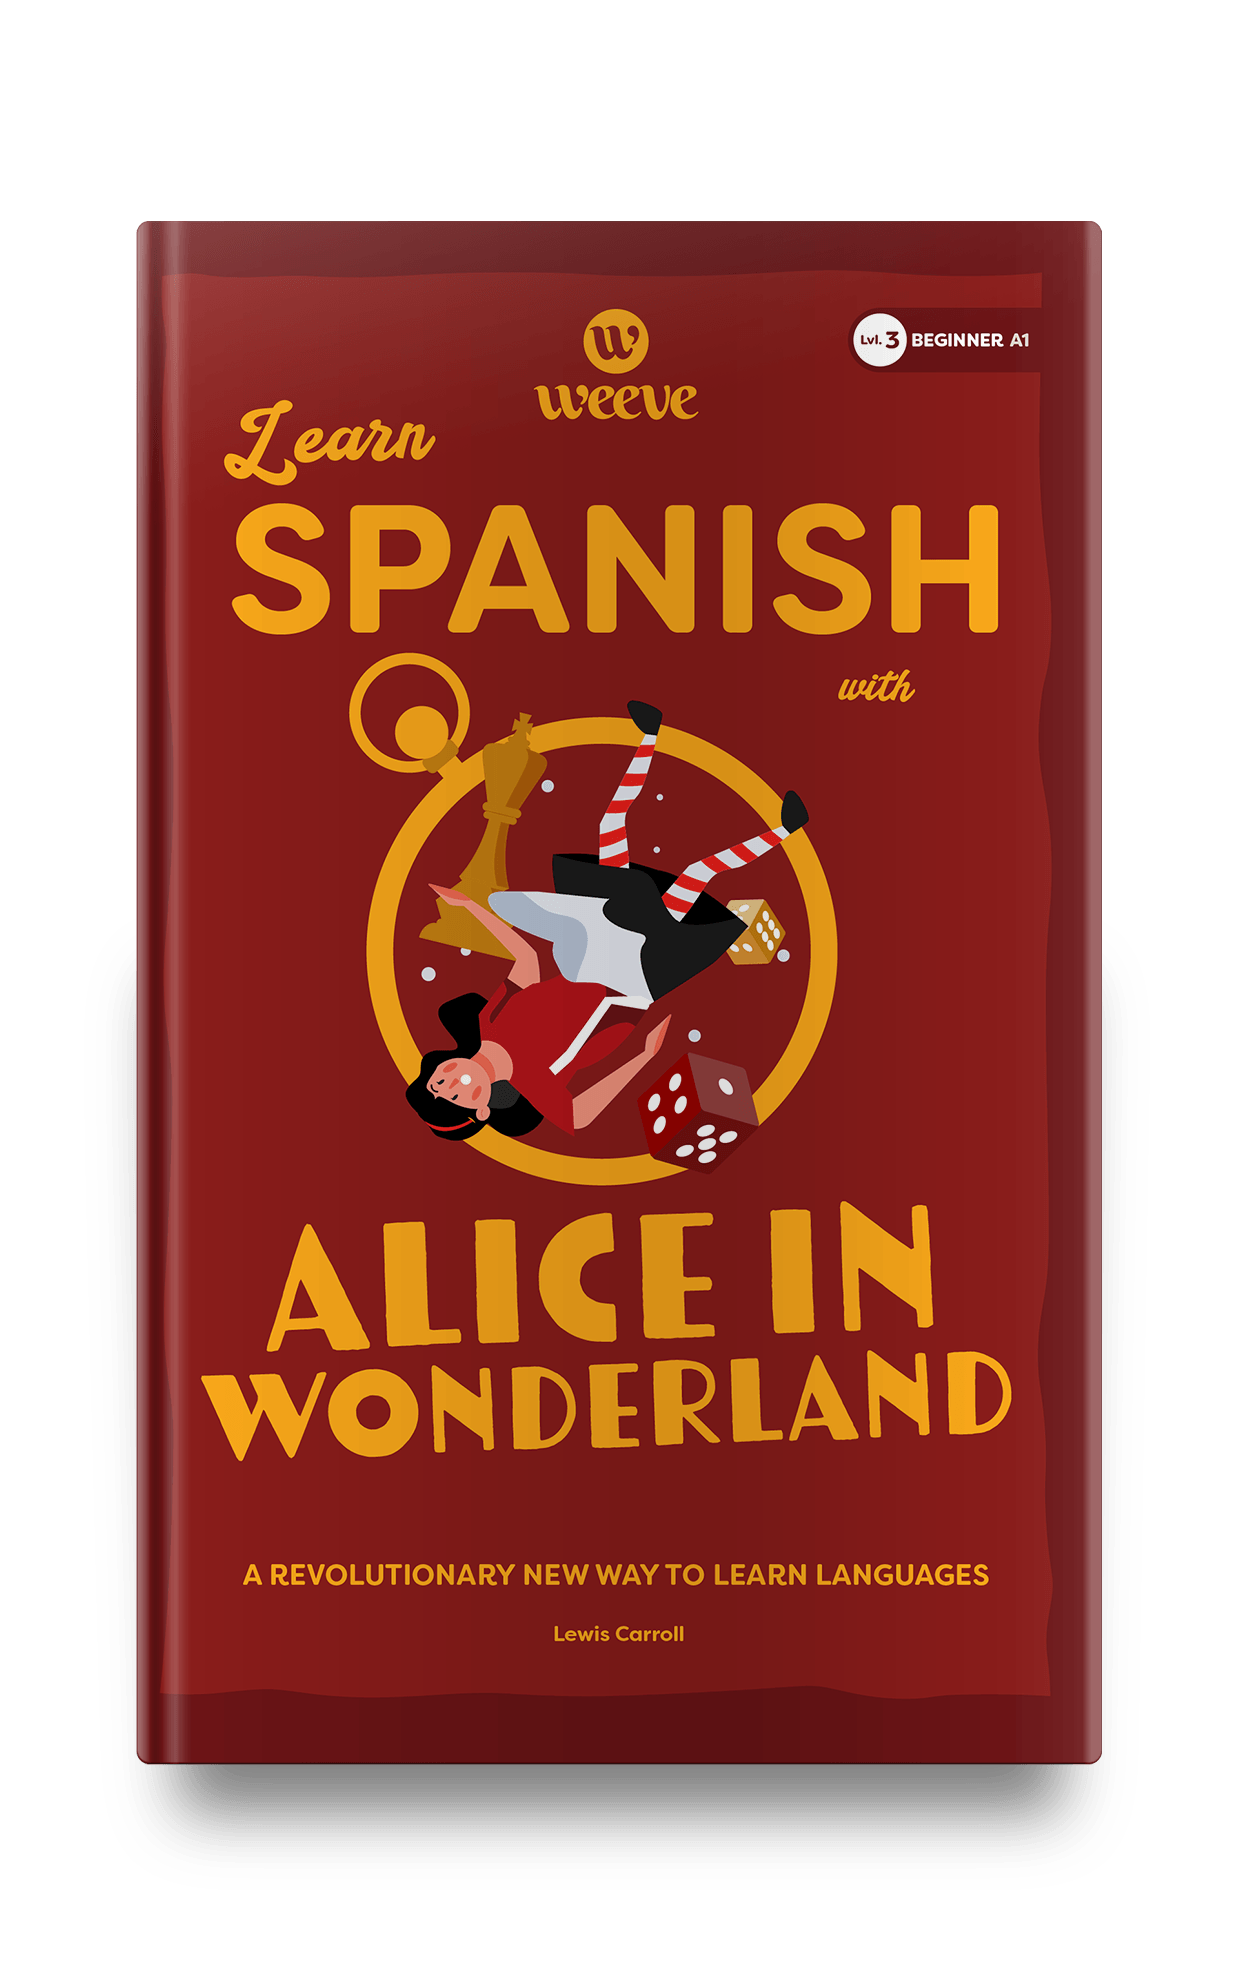 Learn Spanish with Alice in Wonderland - Weeve